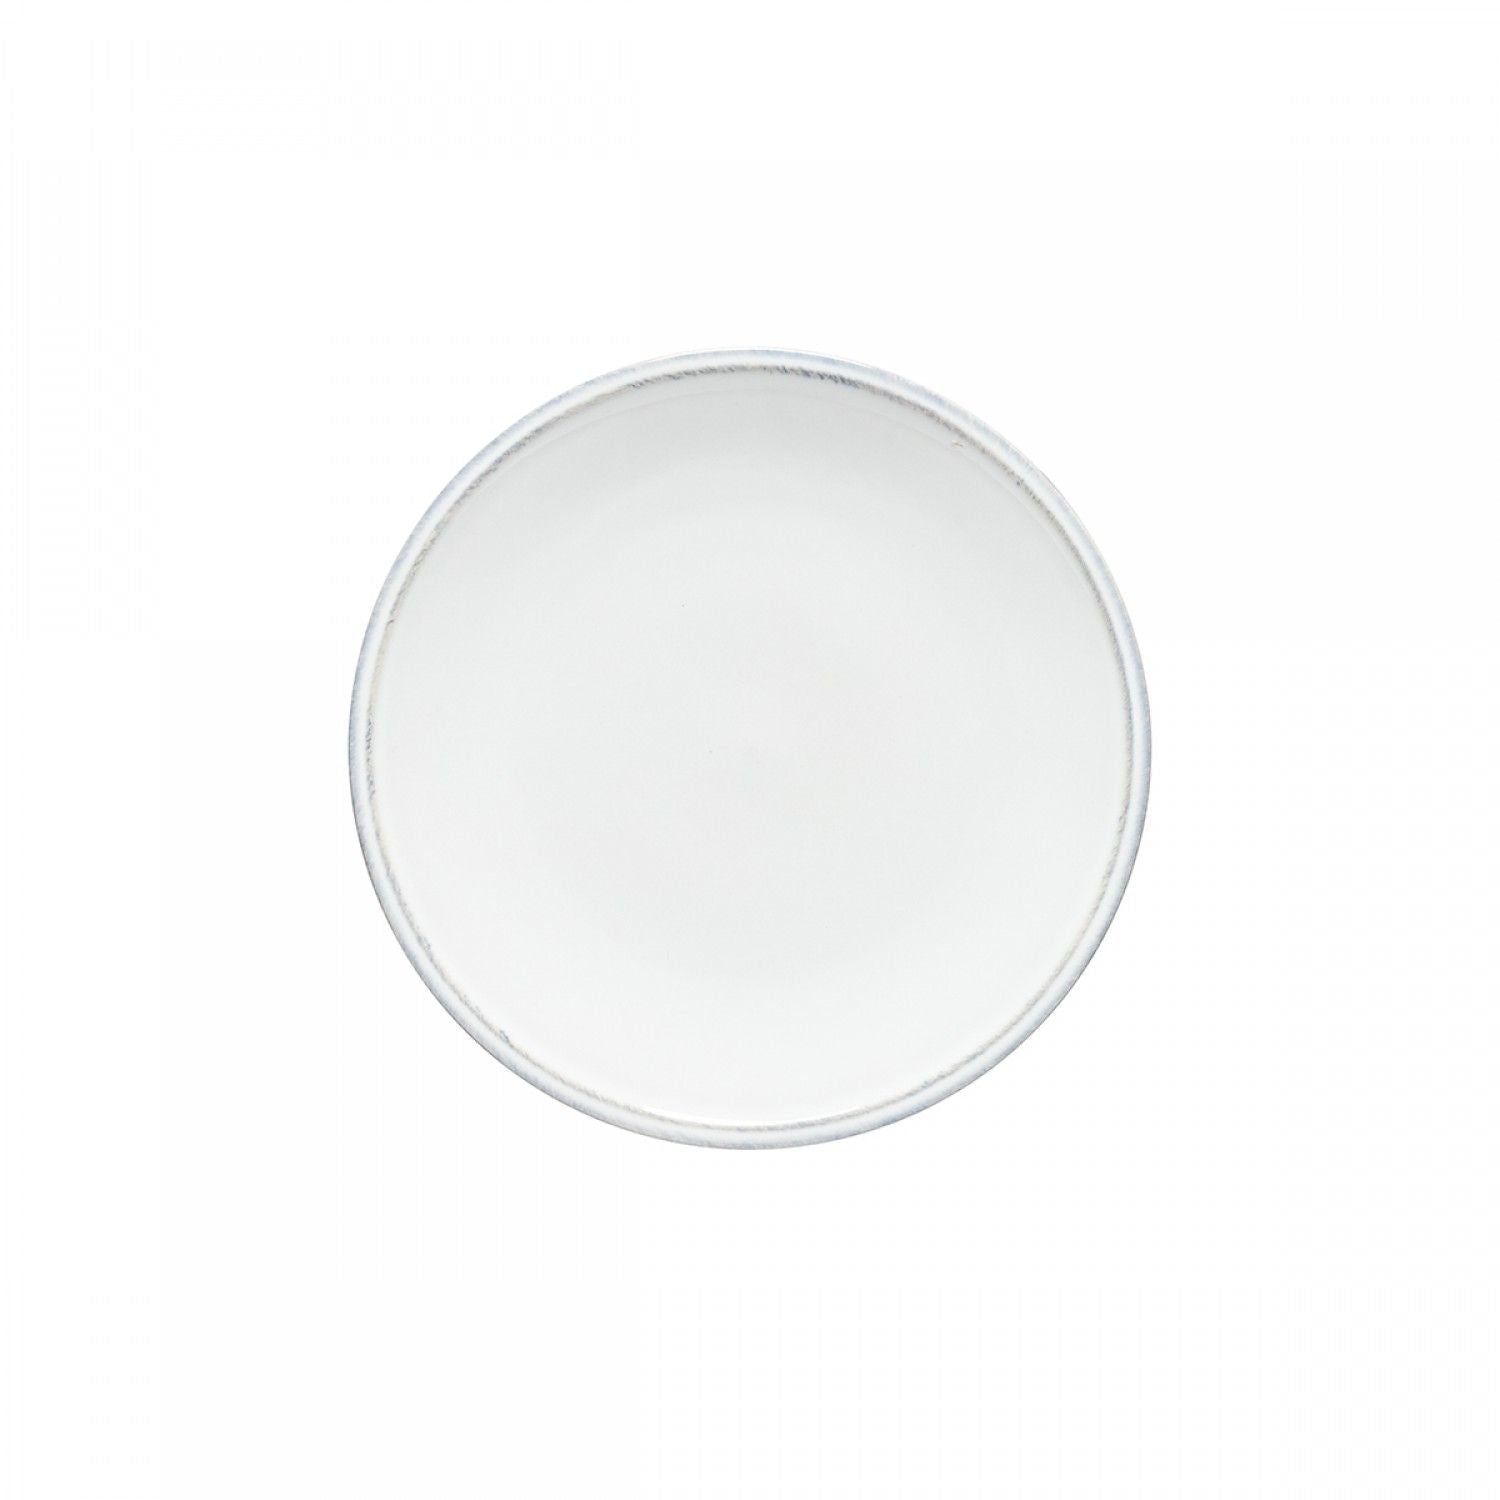 top view of white salad plate.